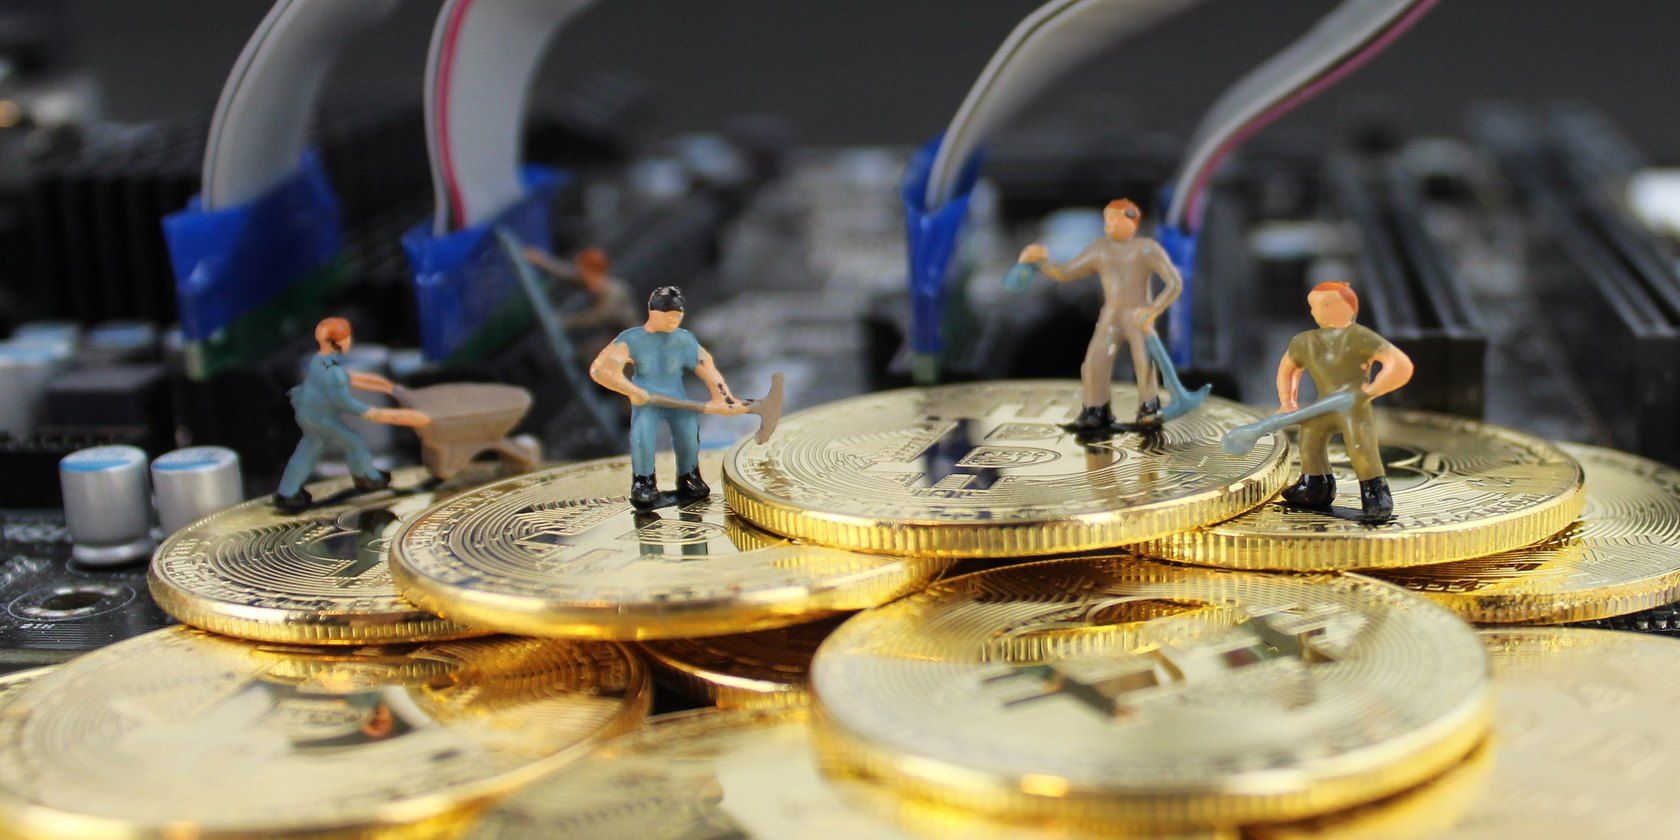 miniature models of workers standing on Bitcoin